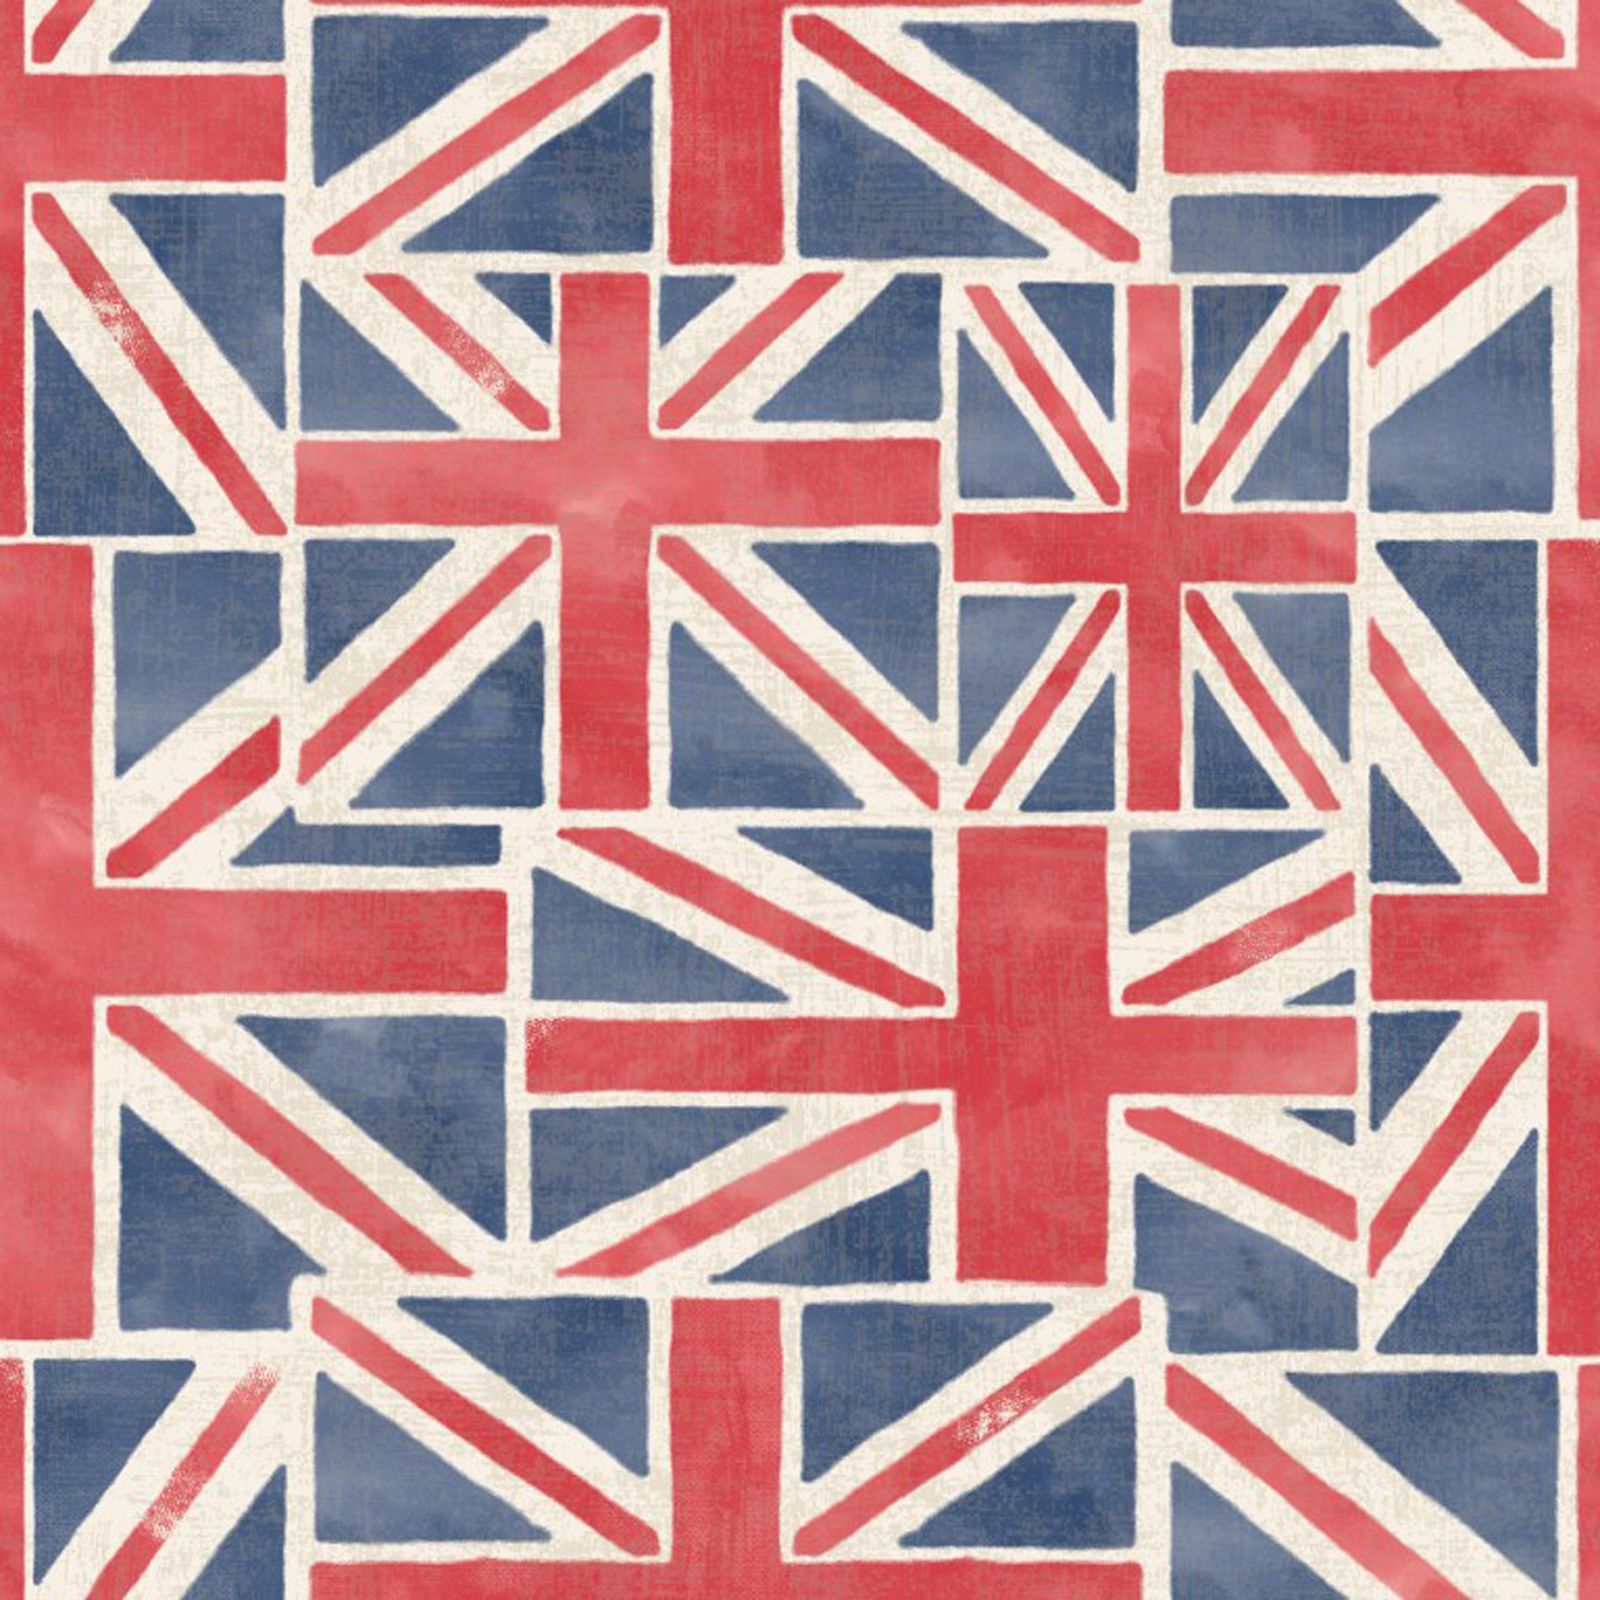 Union Jack Wallpaper 10m New Feature Wall British Flag Bedroom Decor